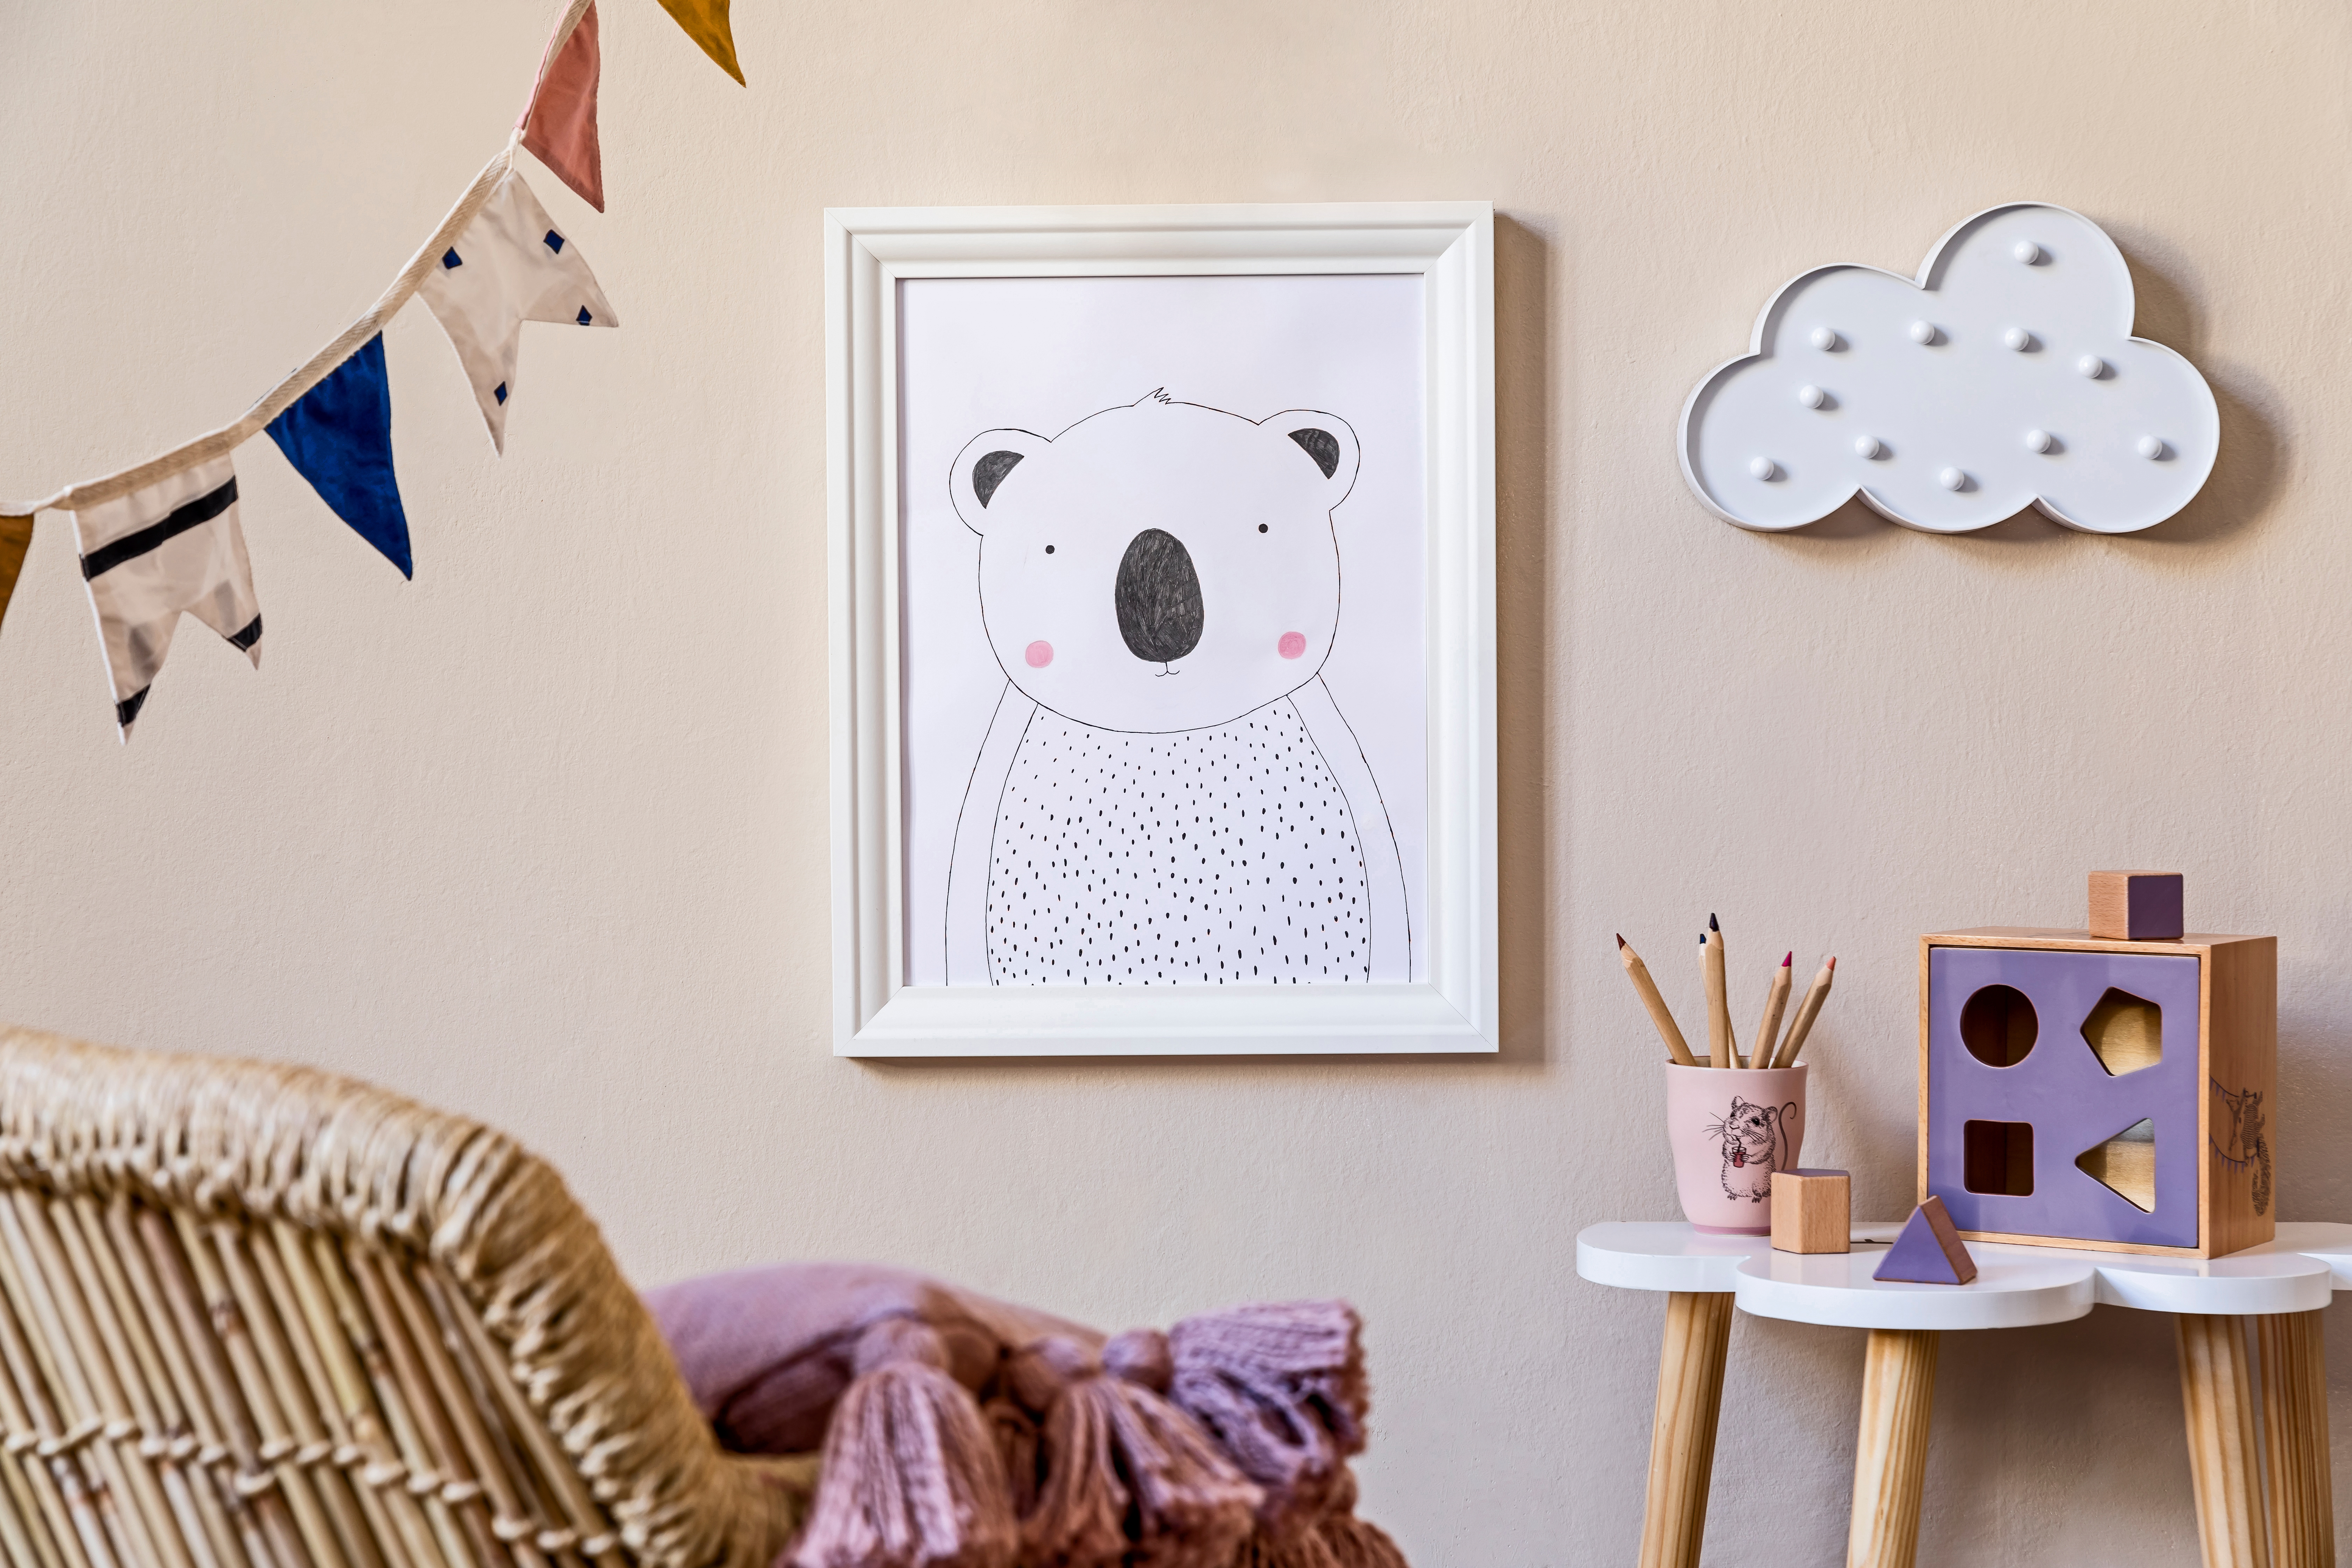 Stylish scandinavian nursery interior with mock up photo frame, wooden toys, design furniture, pillows and accessories. Beautiful decoration on the beige background wall. Home decor for children room | Source: Getty Images